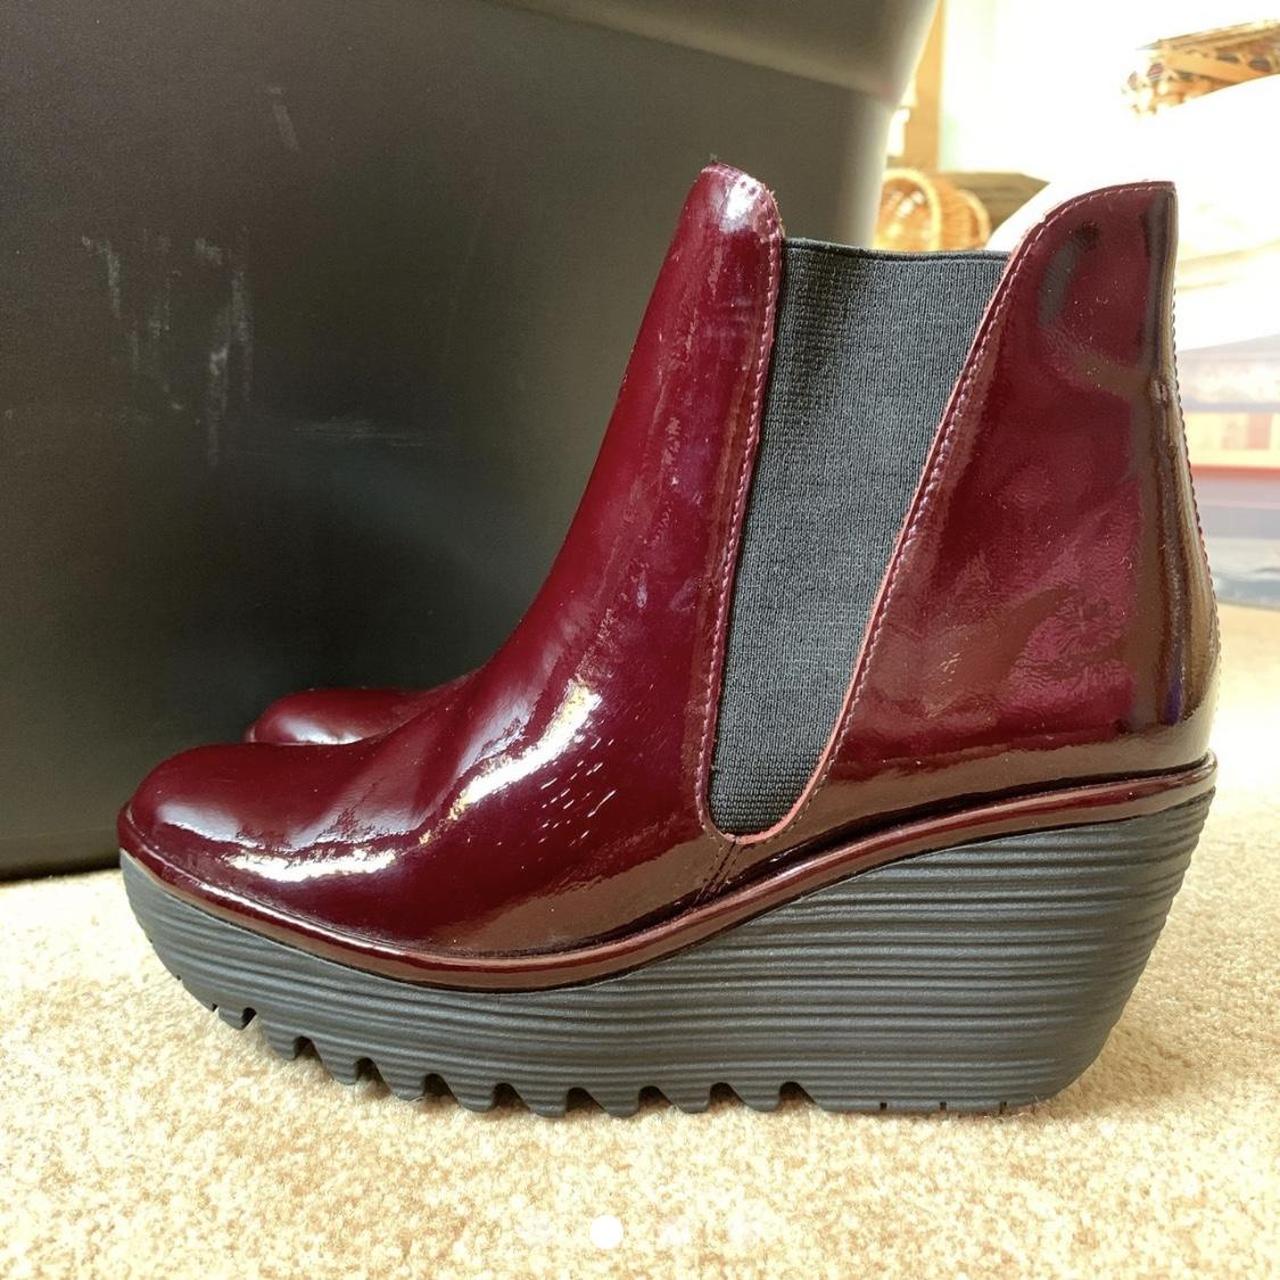 Fly London Women's Burgundy and Black Boots (2)